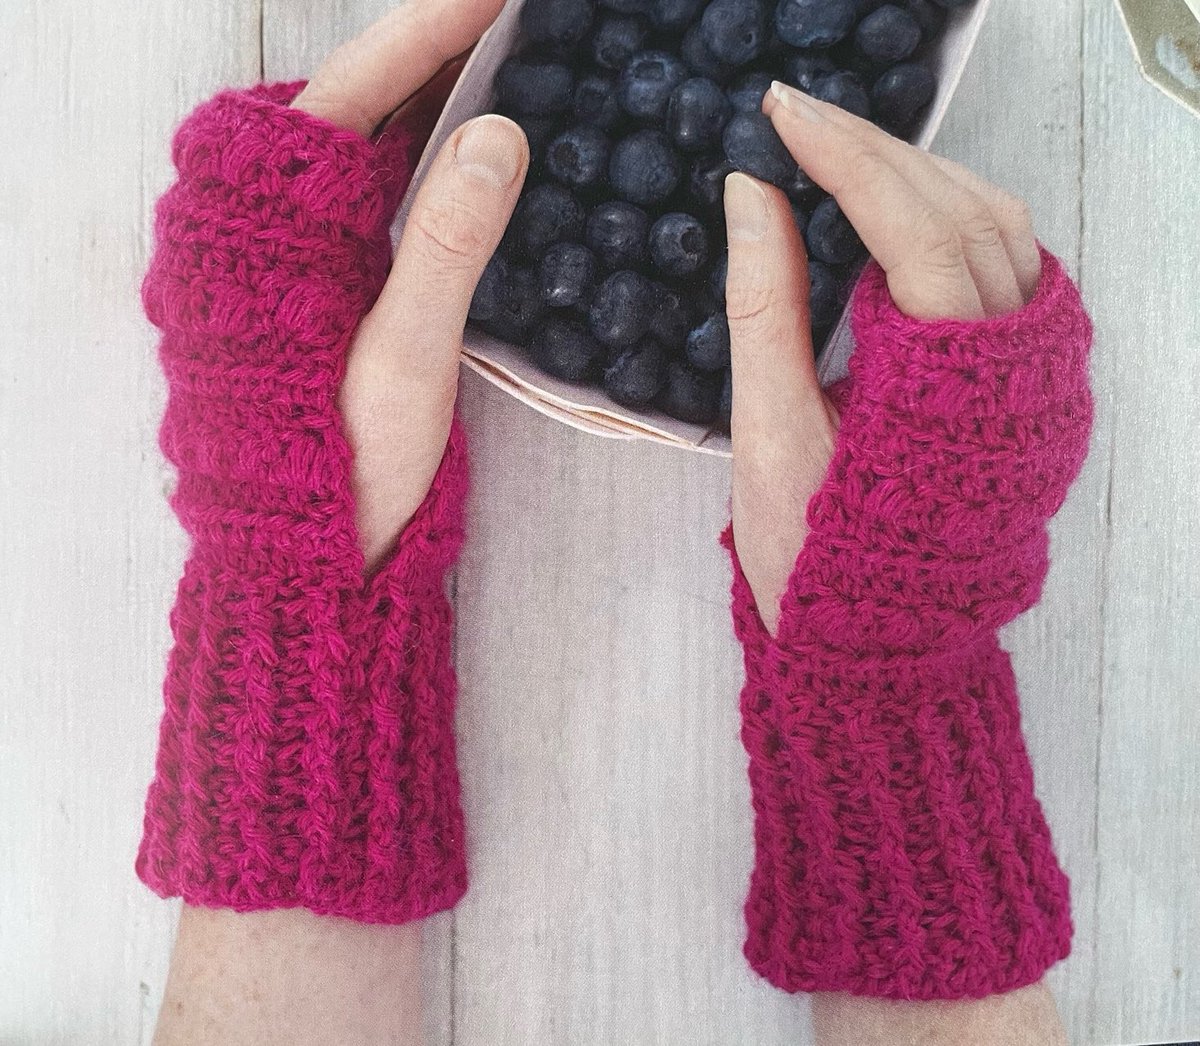 Excited to share this item from my shop: Crochet Wrist Warmers Fingerless Mittens PDF Pattern Instant Download #crochetpattern #crochet #sewing #crochetmittens #fingerlessmitts #wristwarmers #crochetgloves #crochetfingerless #yarn etsy.me/3F9Mfu1